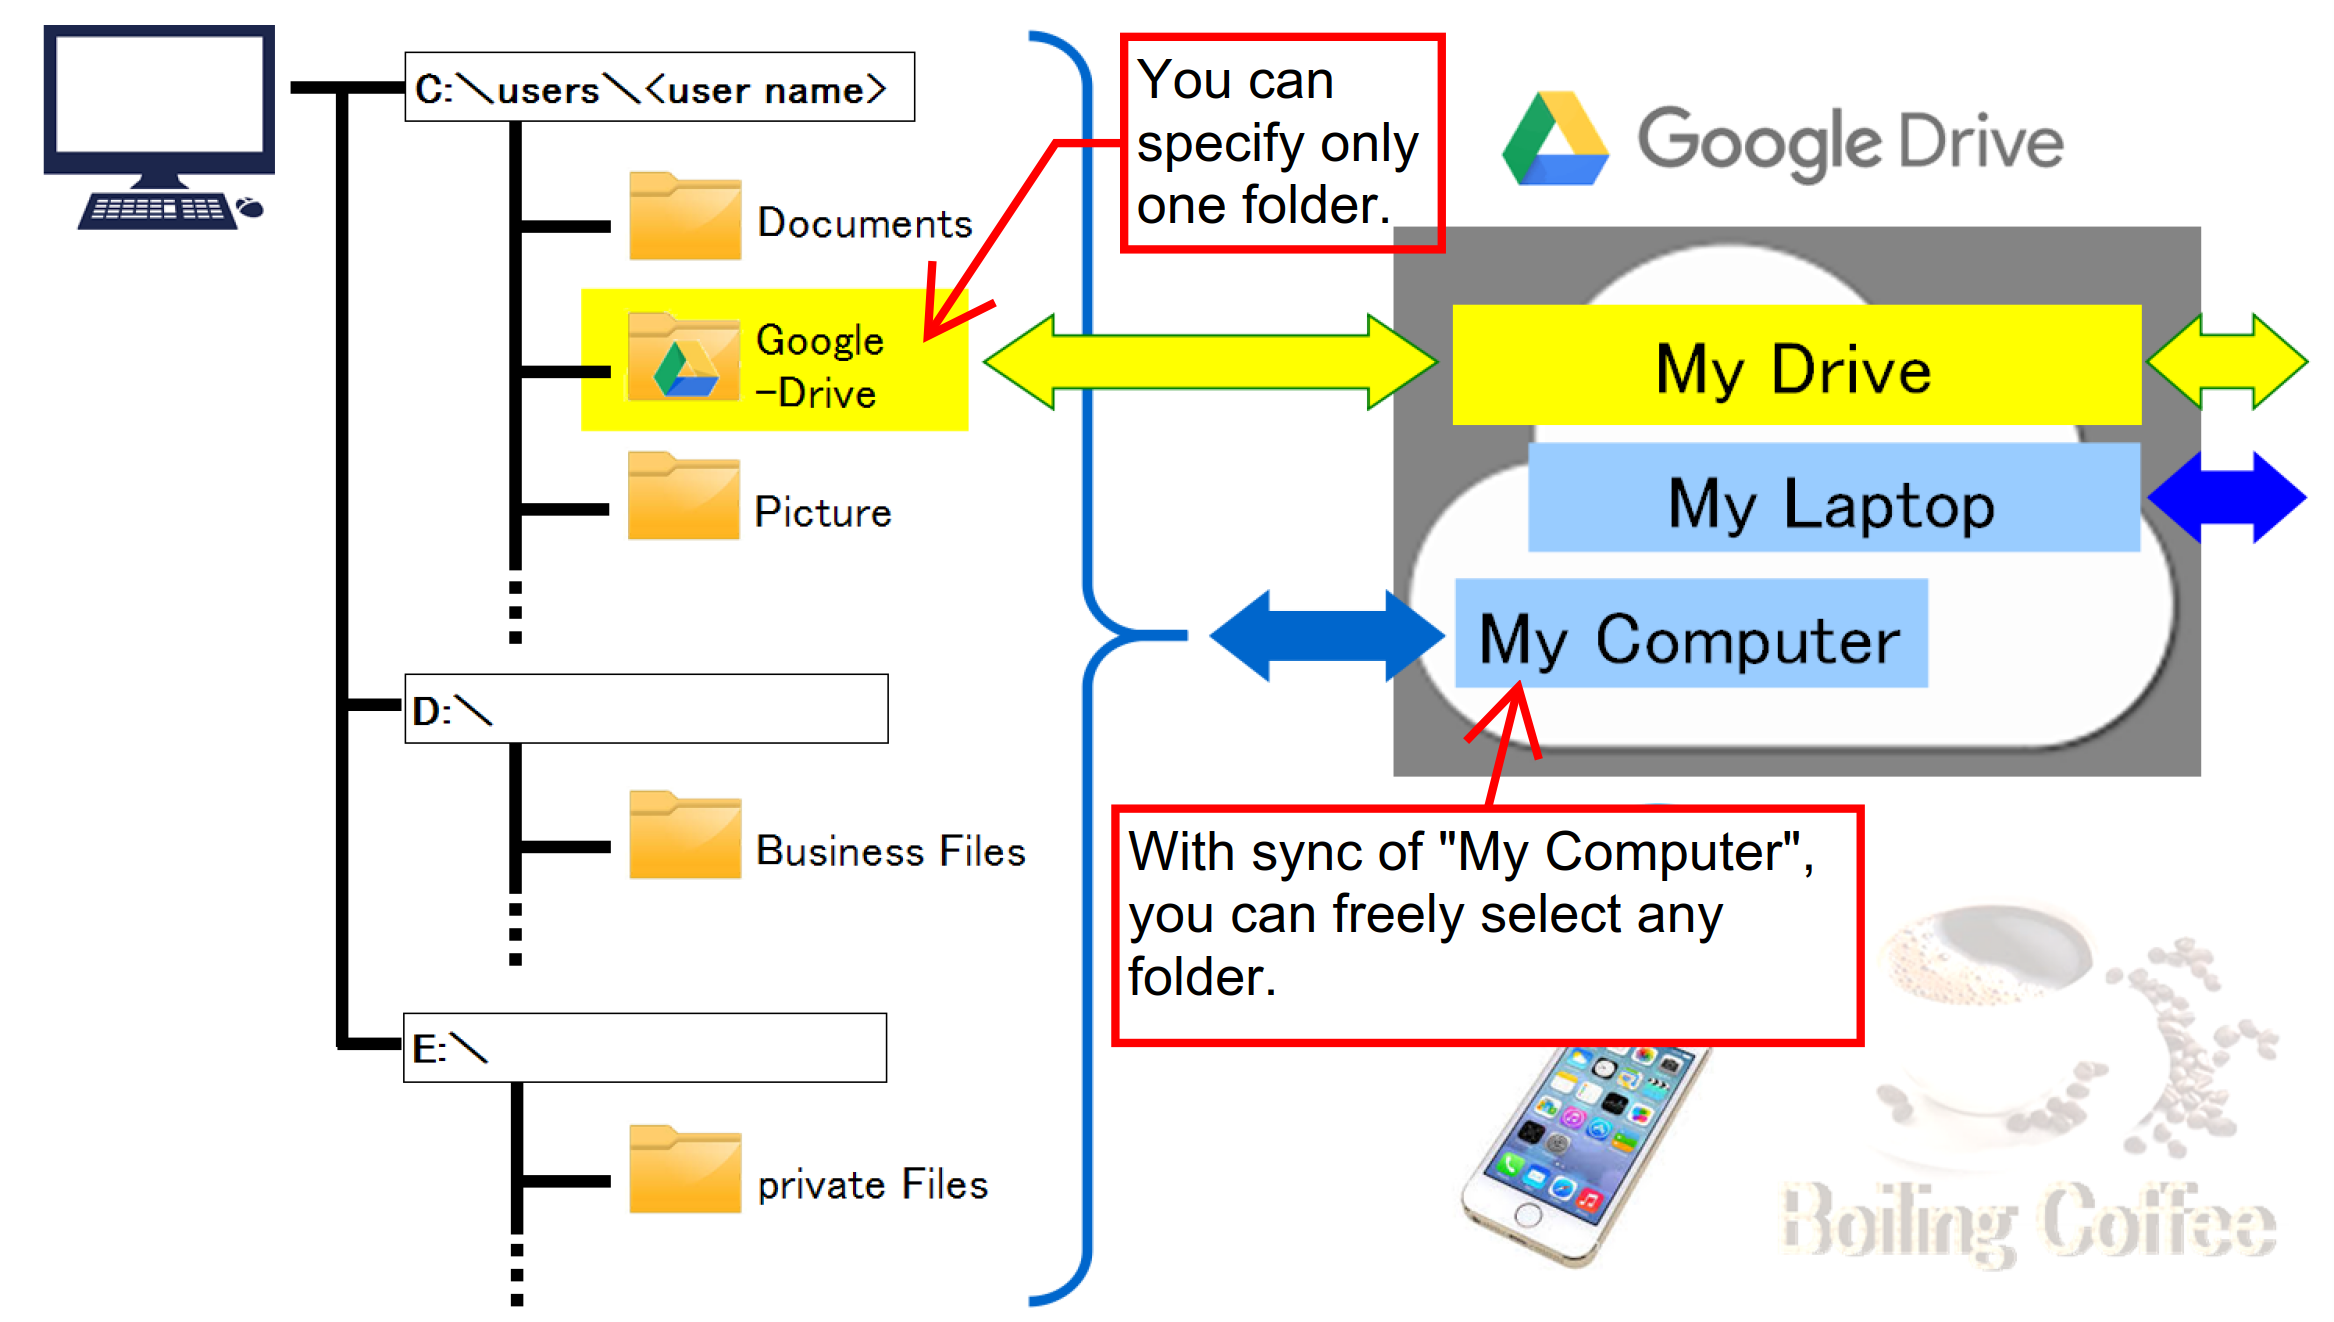 Can Google Drive sync folders between computers?